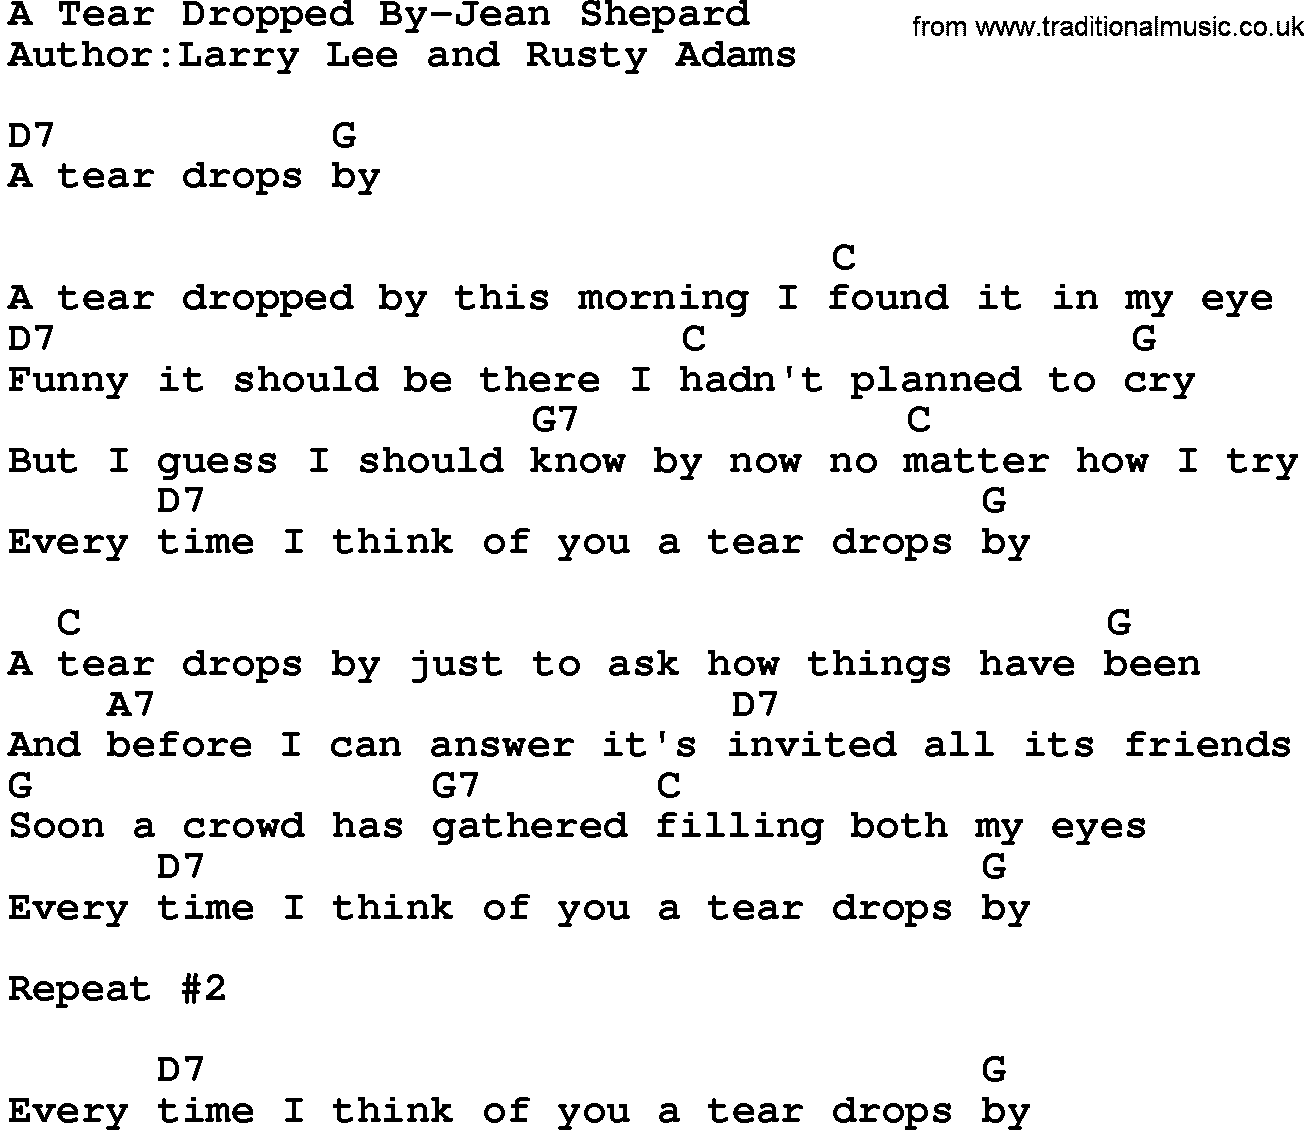 Country music song: A Tear Dropped By-Jean Shepard lyrics and chords